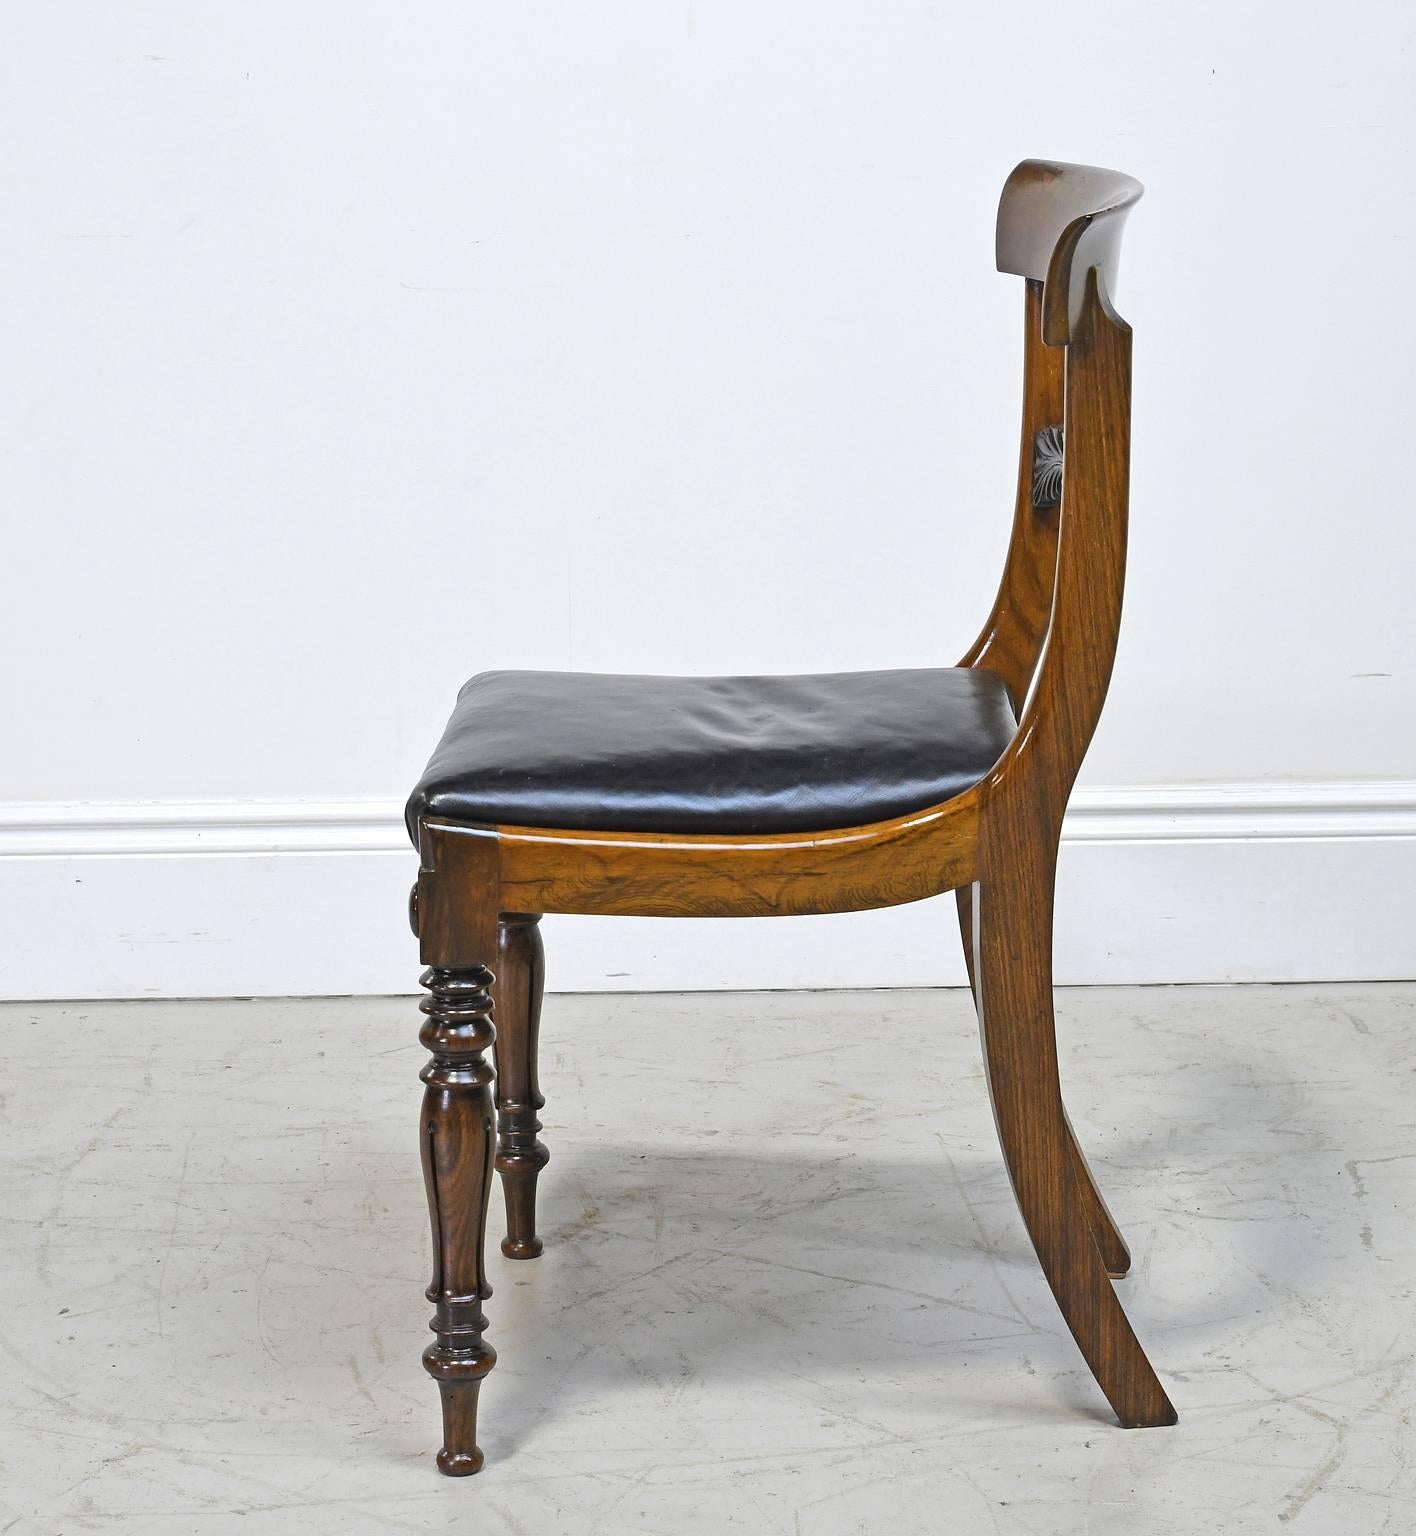 William IV English Regency Rosewood Chair with Black Leather Upholstery, circa 1830